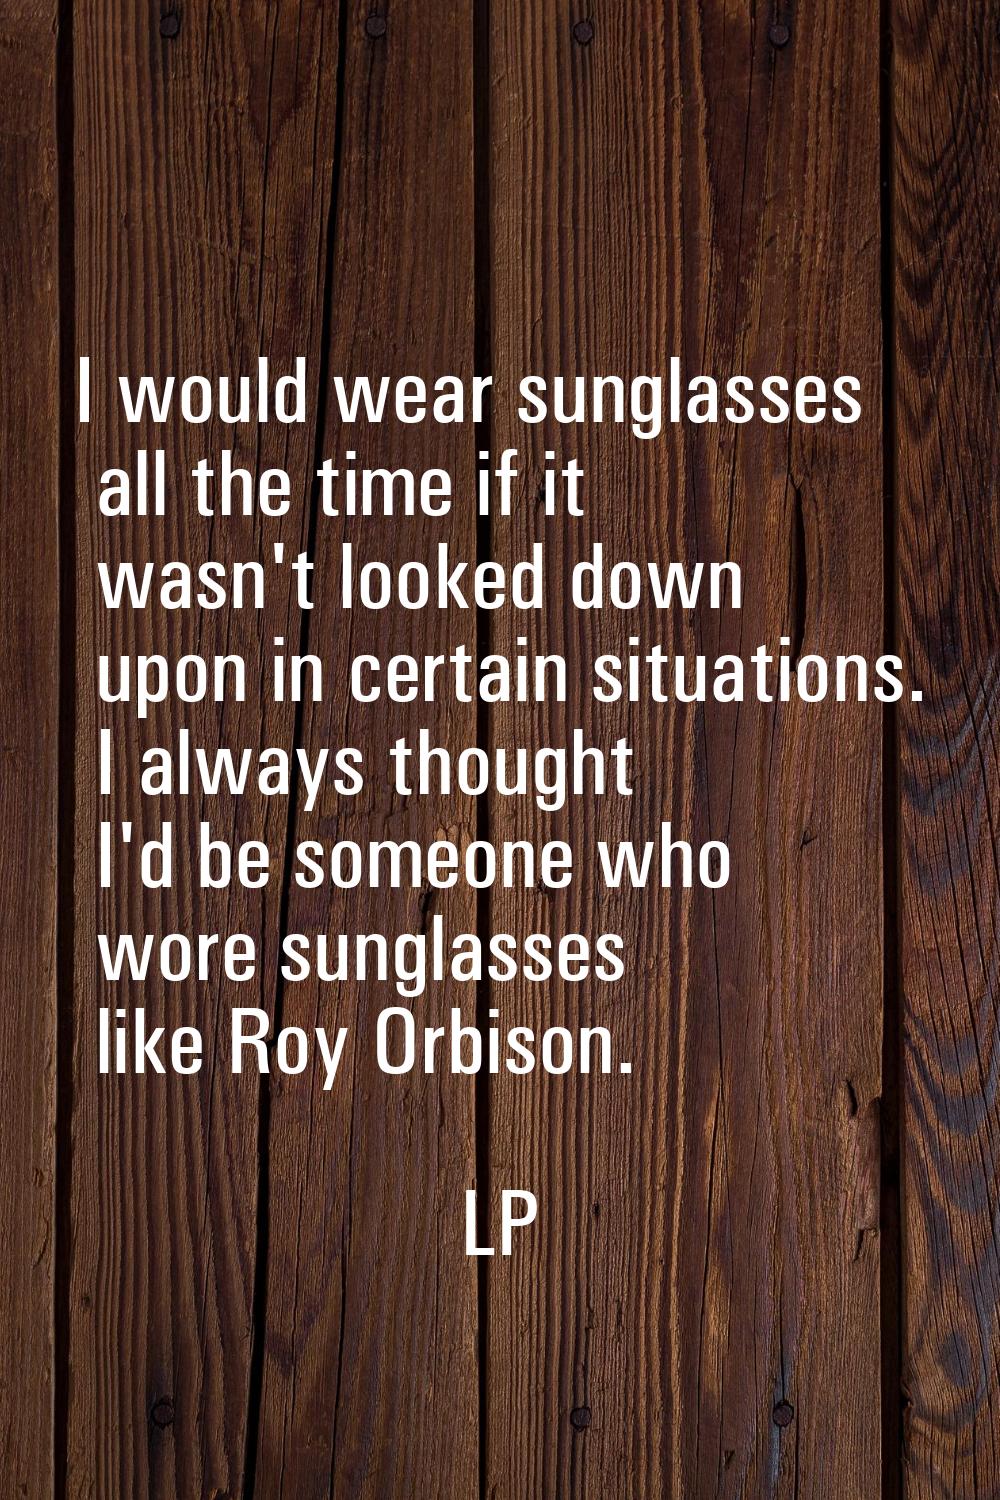 I would wear sunglasses all the time if it wasn't looked down upon in certain situations. I always 